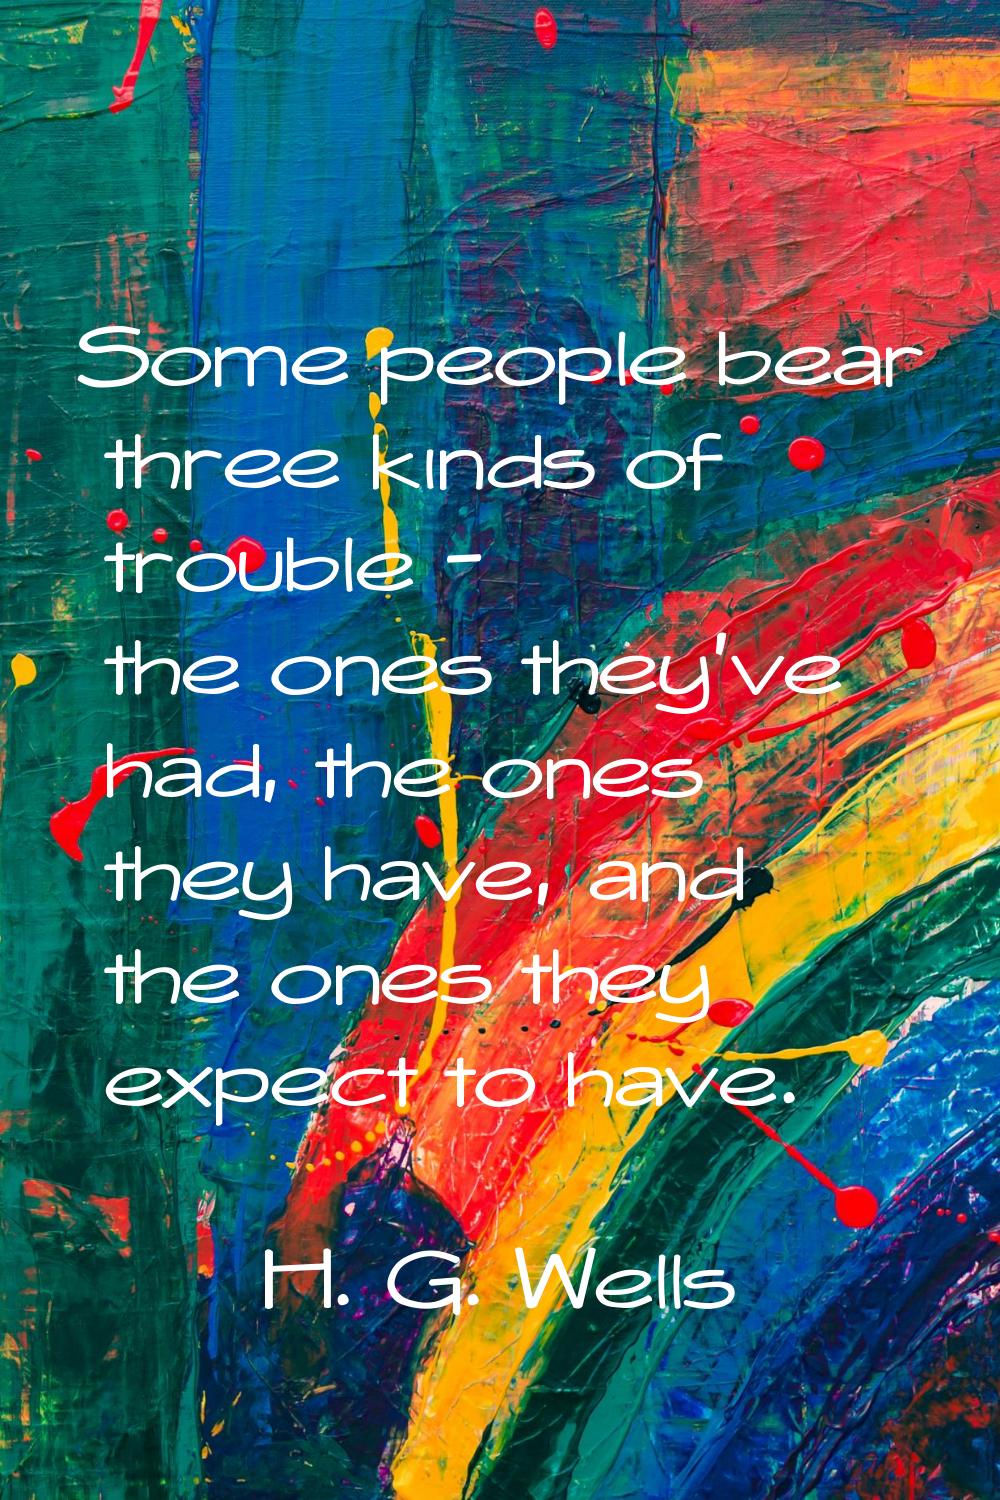 Some people bear three kinds of trouble - the ones they've had, the ones they have, and the ones th